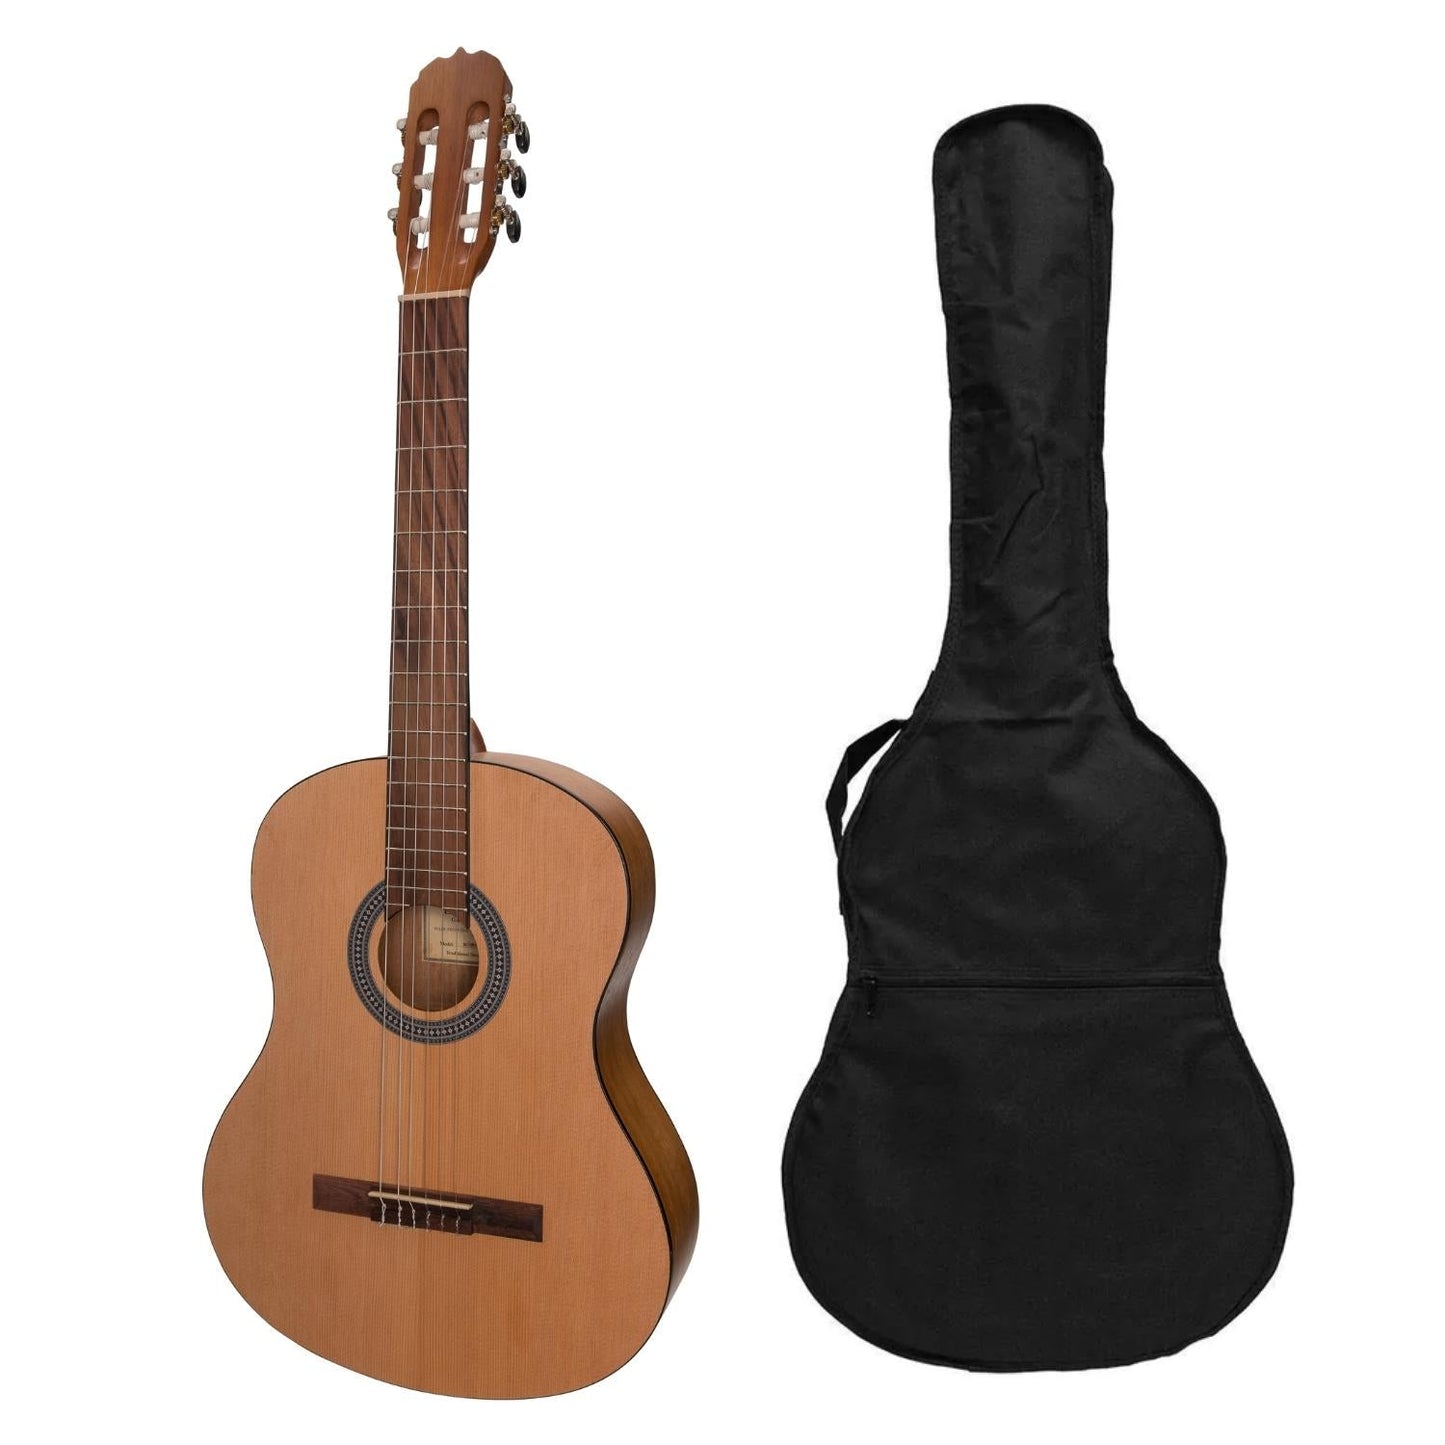 Sanchez Full-size Size Student Classical Guitar with Gig Bag (Spruce/Acacia)